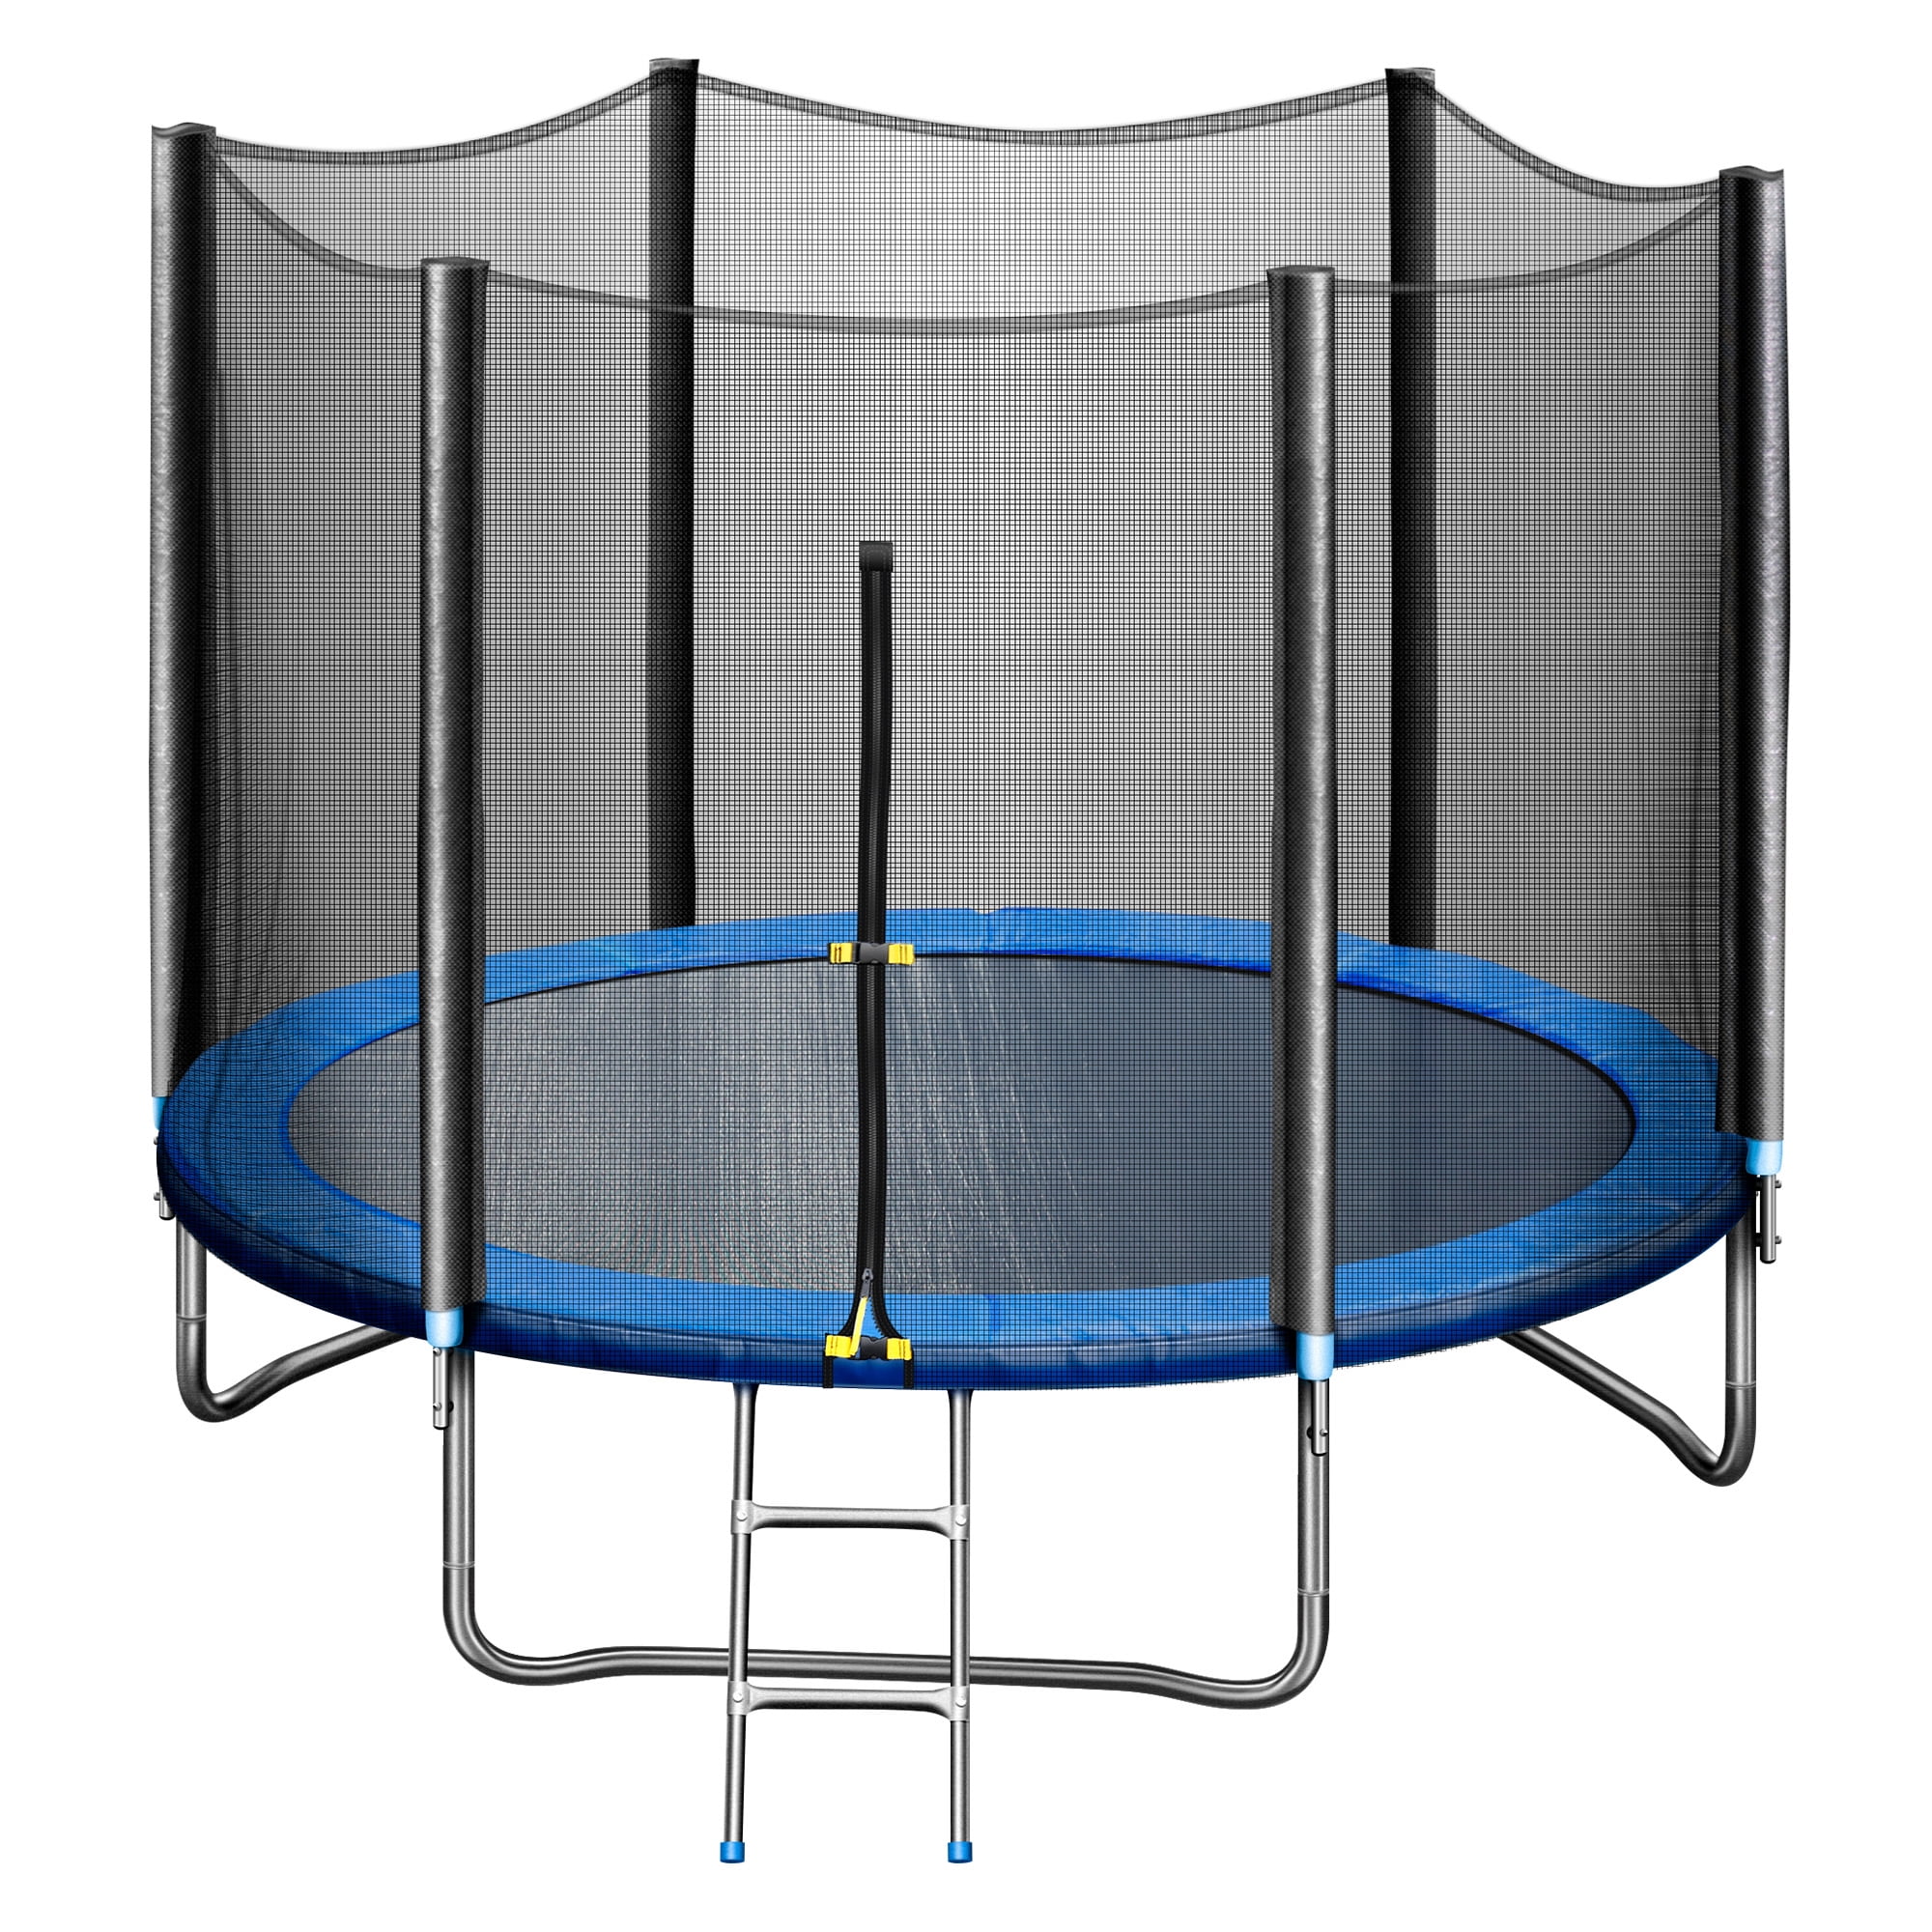 moobody 10FT Recreational Trampoline with Enclosure Net, Waterproof Jumping Mat,Simple Ladder,Max Weight Capacity 661 LB for 3-4 Kids,Blue